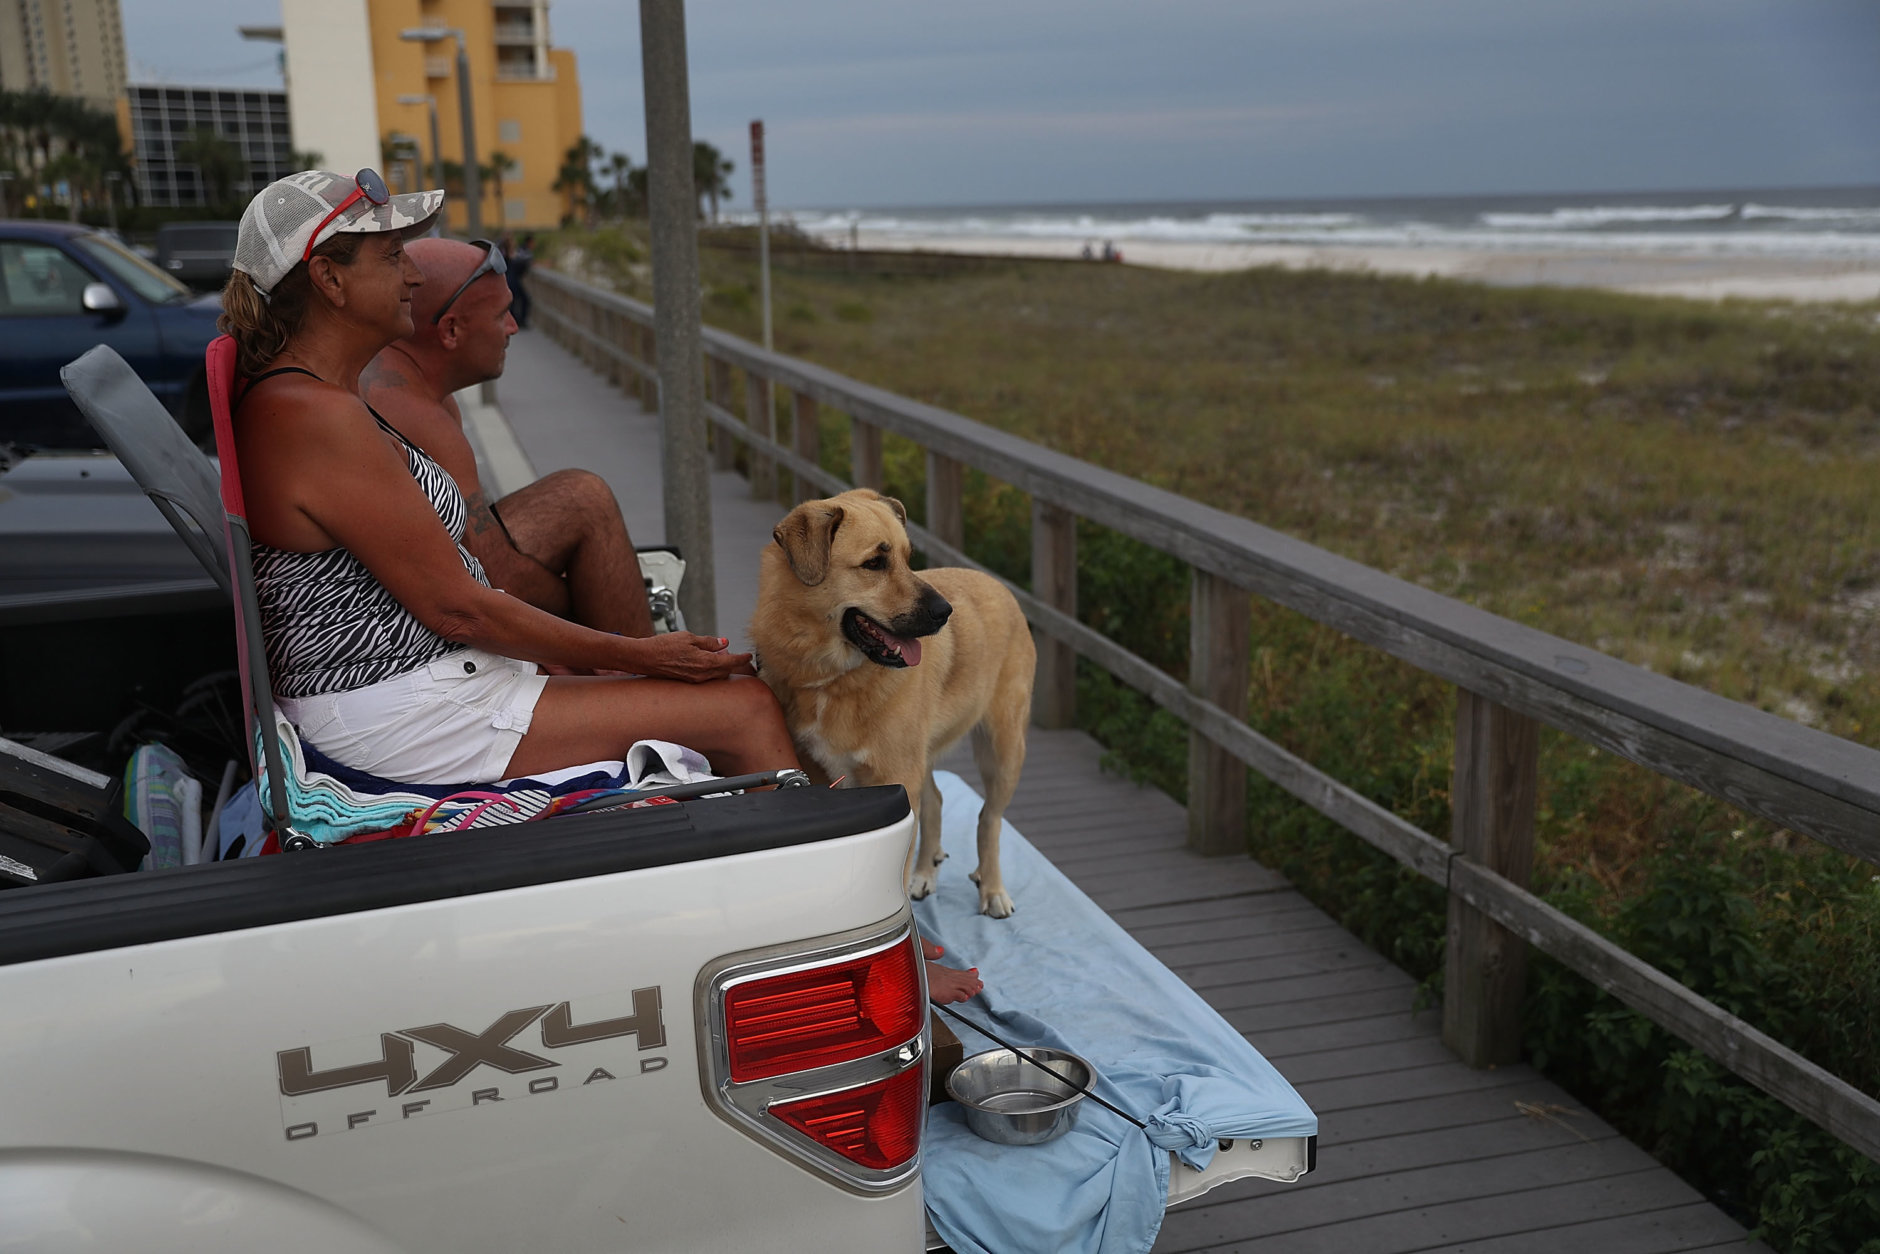 PANAMA CITY, FL - OCTOBER 09:  David Gage and Christal Gage and their dog, Bear, relax on the back of their pickup truck next to the ocean as they wait for the arrival of Hurricane Michael on October 9, 2018 in Parker, Florida. Michael, which strengthened to a Category 3 storm today with sustained winds of 120 mph, is expected to make landfall in the Florida Panhandle by Wednesday.   (Photo by Joe Raedle/Getty Images)